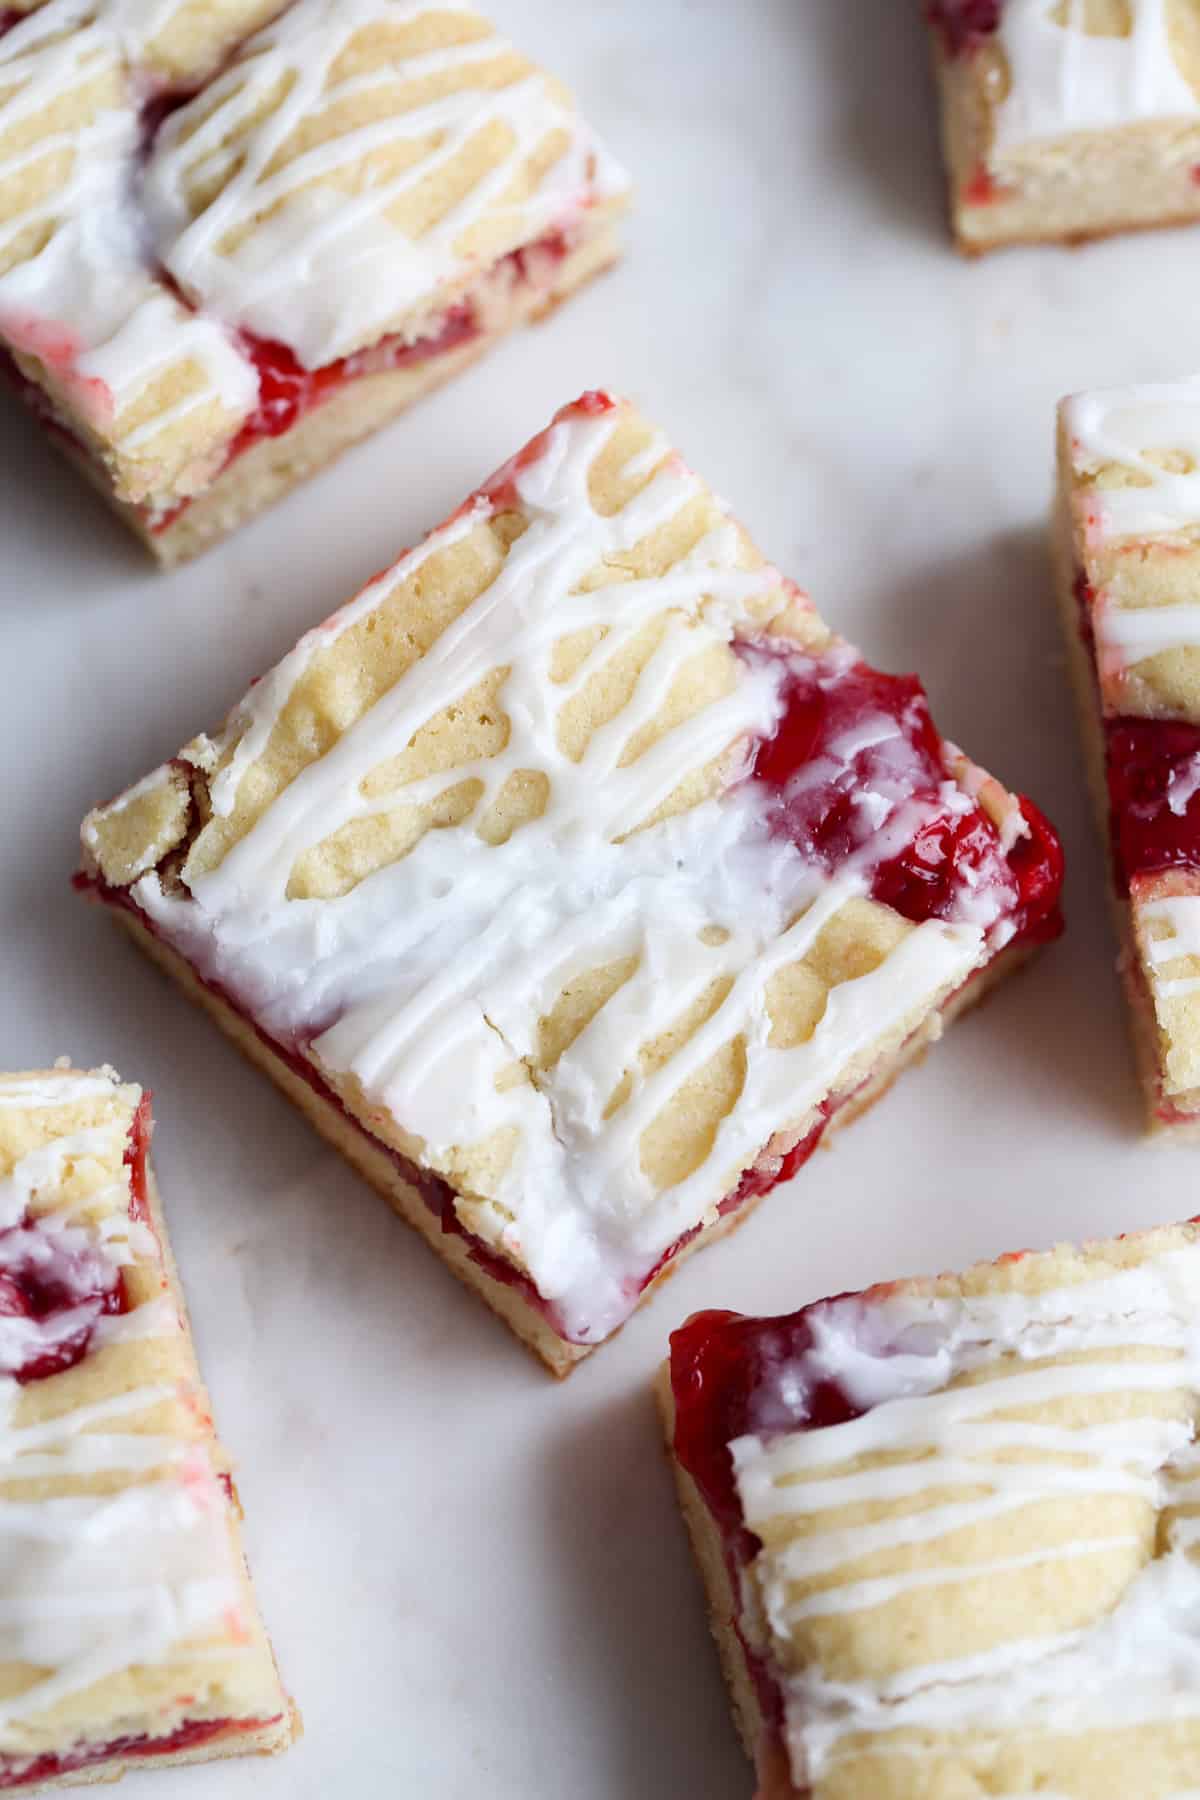 Slices of Cobblestone Cherry Cake cut into squares with white icing drizzled on top from above on a white tray.